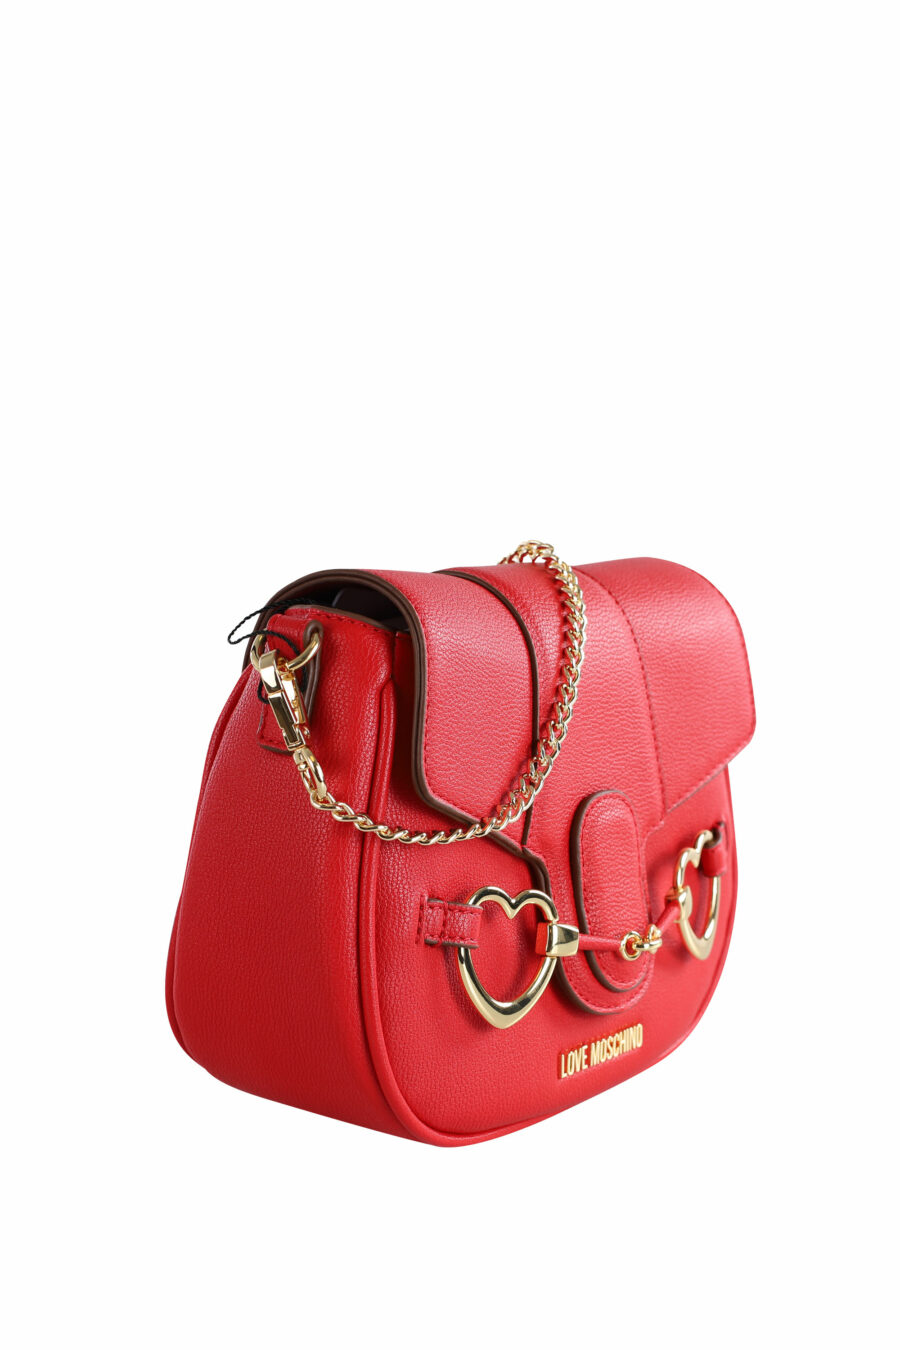 Red shoulder bag with mini-logo and hearts in golden metal - IMG 3620